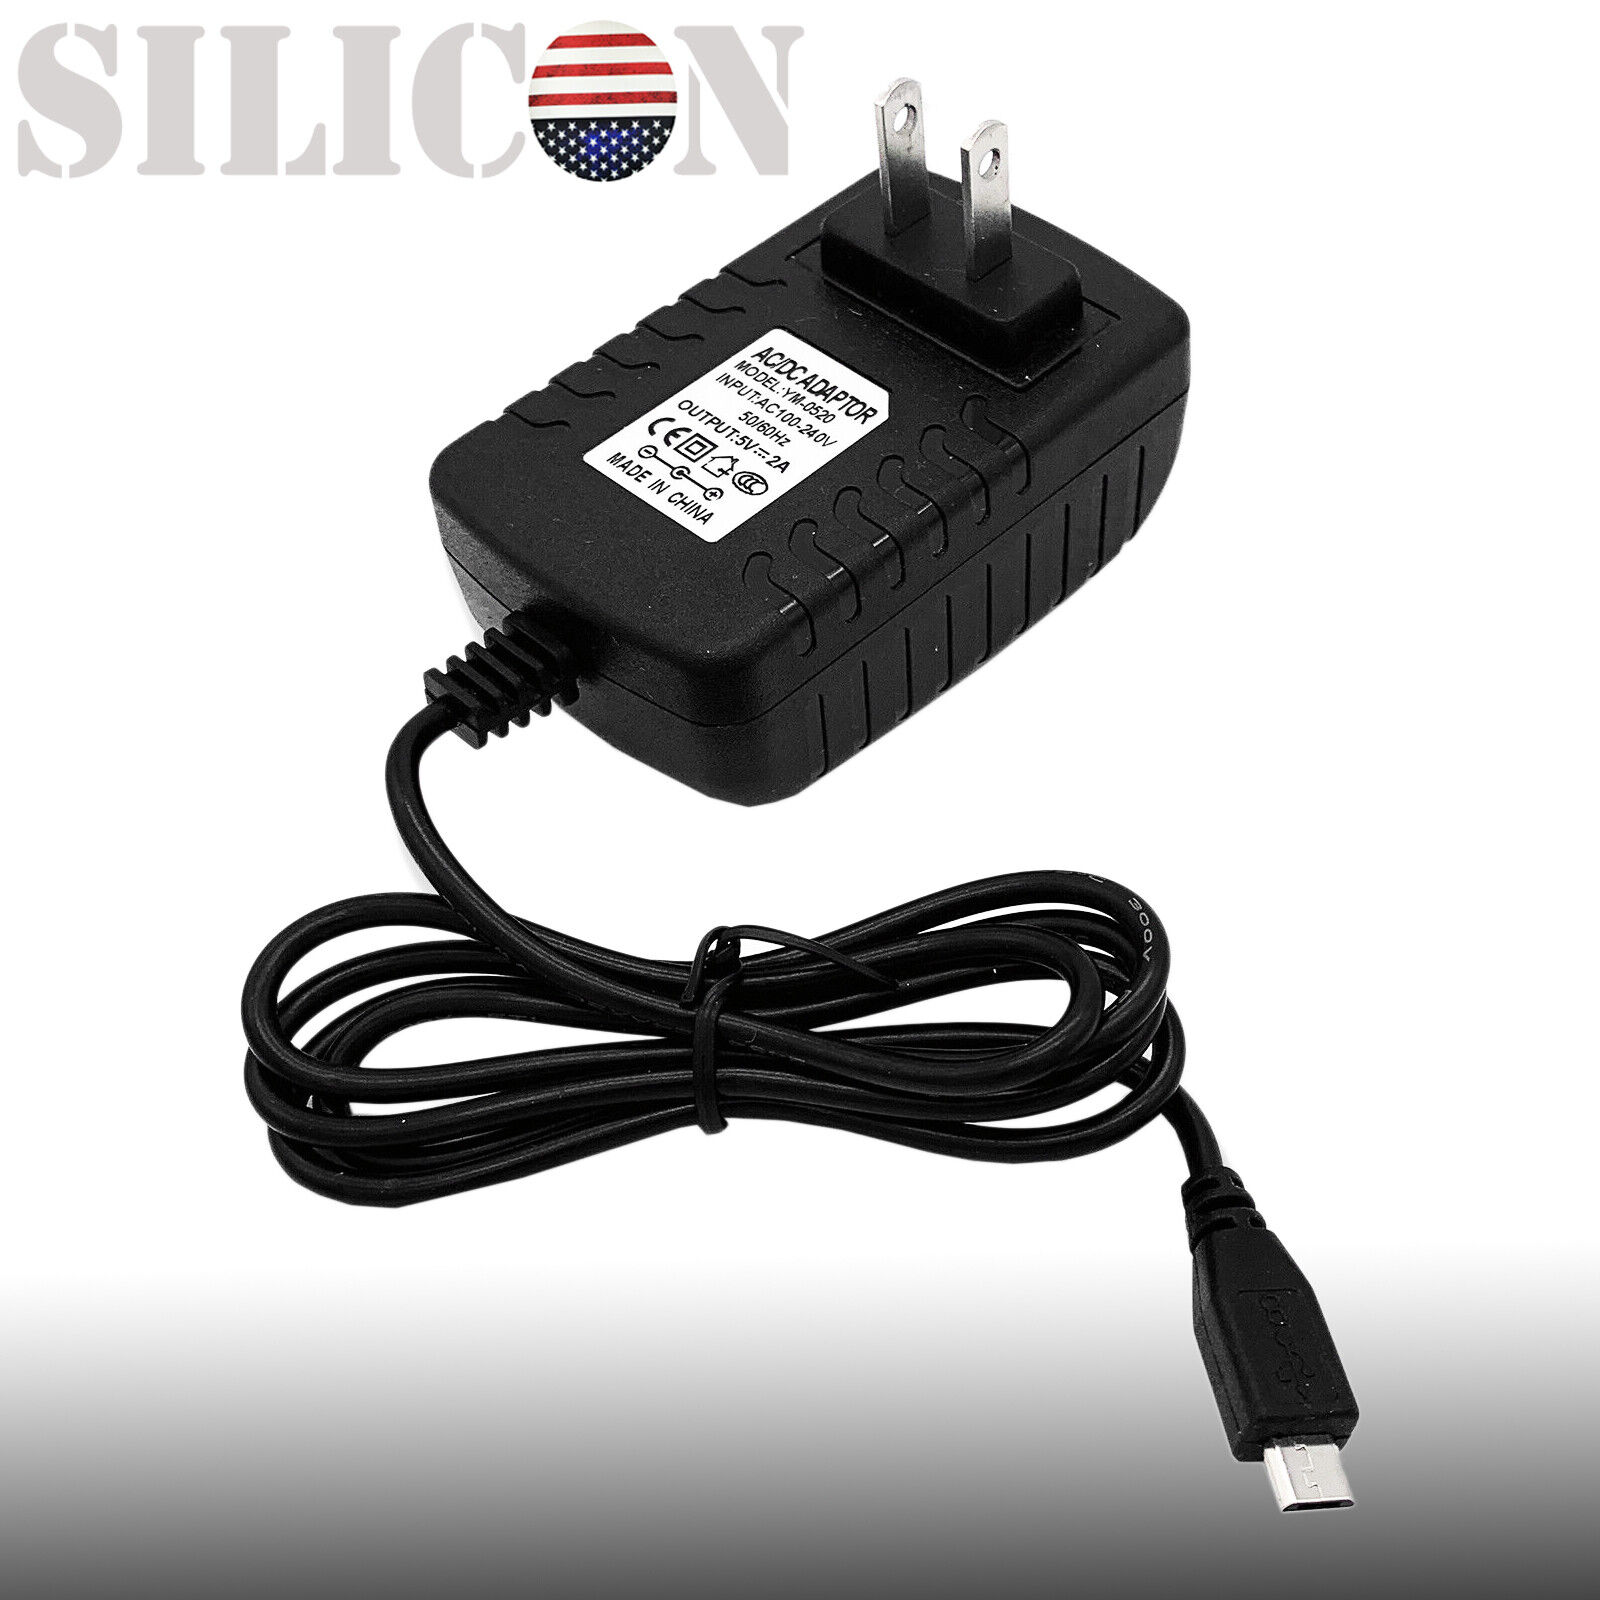 5V 2A AC DC Charger Power Adapter for ASUS VivoTab Smart ME400C-C1 Win8 Tablet